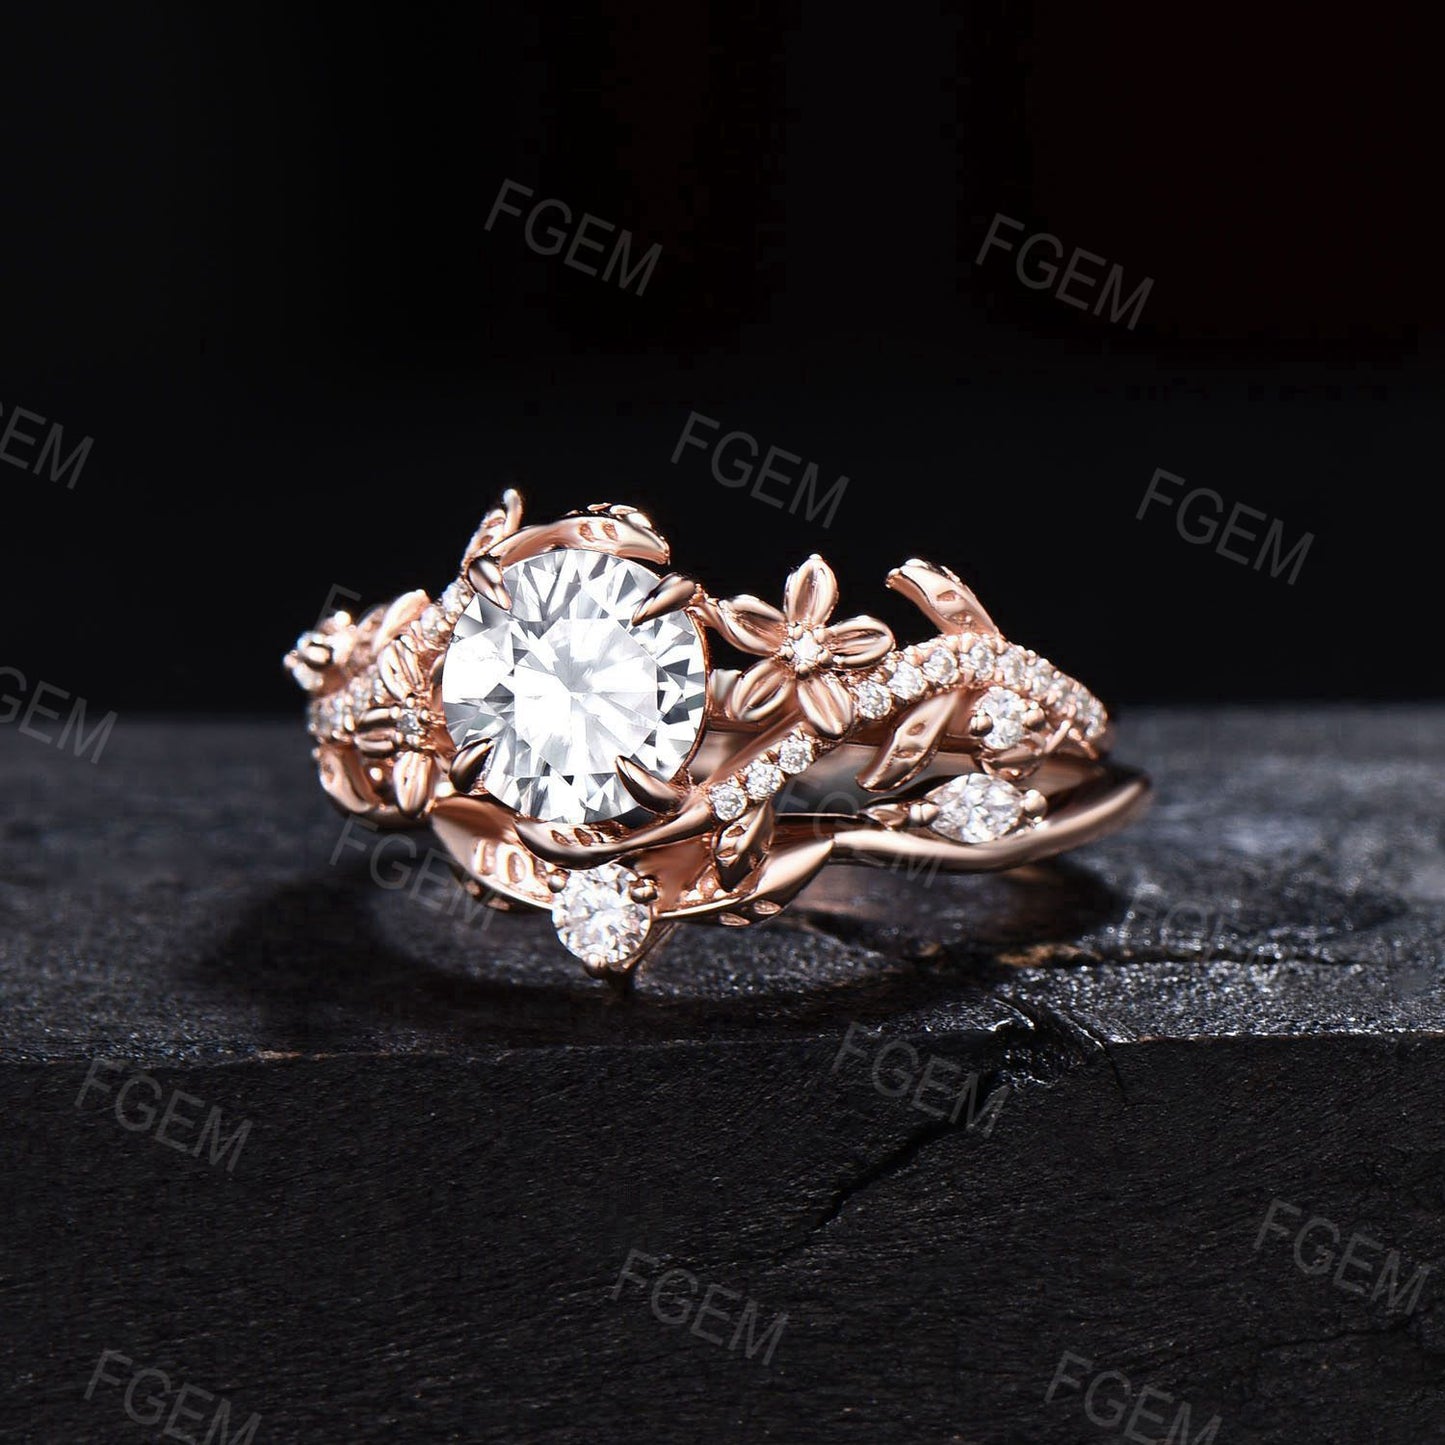 Unique Branch Leaf Moissanite Engagement Ring Set Rose Gold Bypass Ring Round Moissanite Diamond Bridal Set Floral Pave Ring Proposal Gift